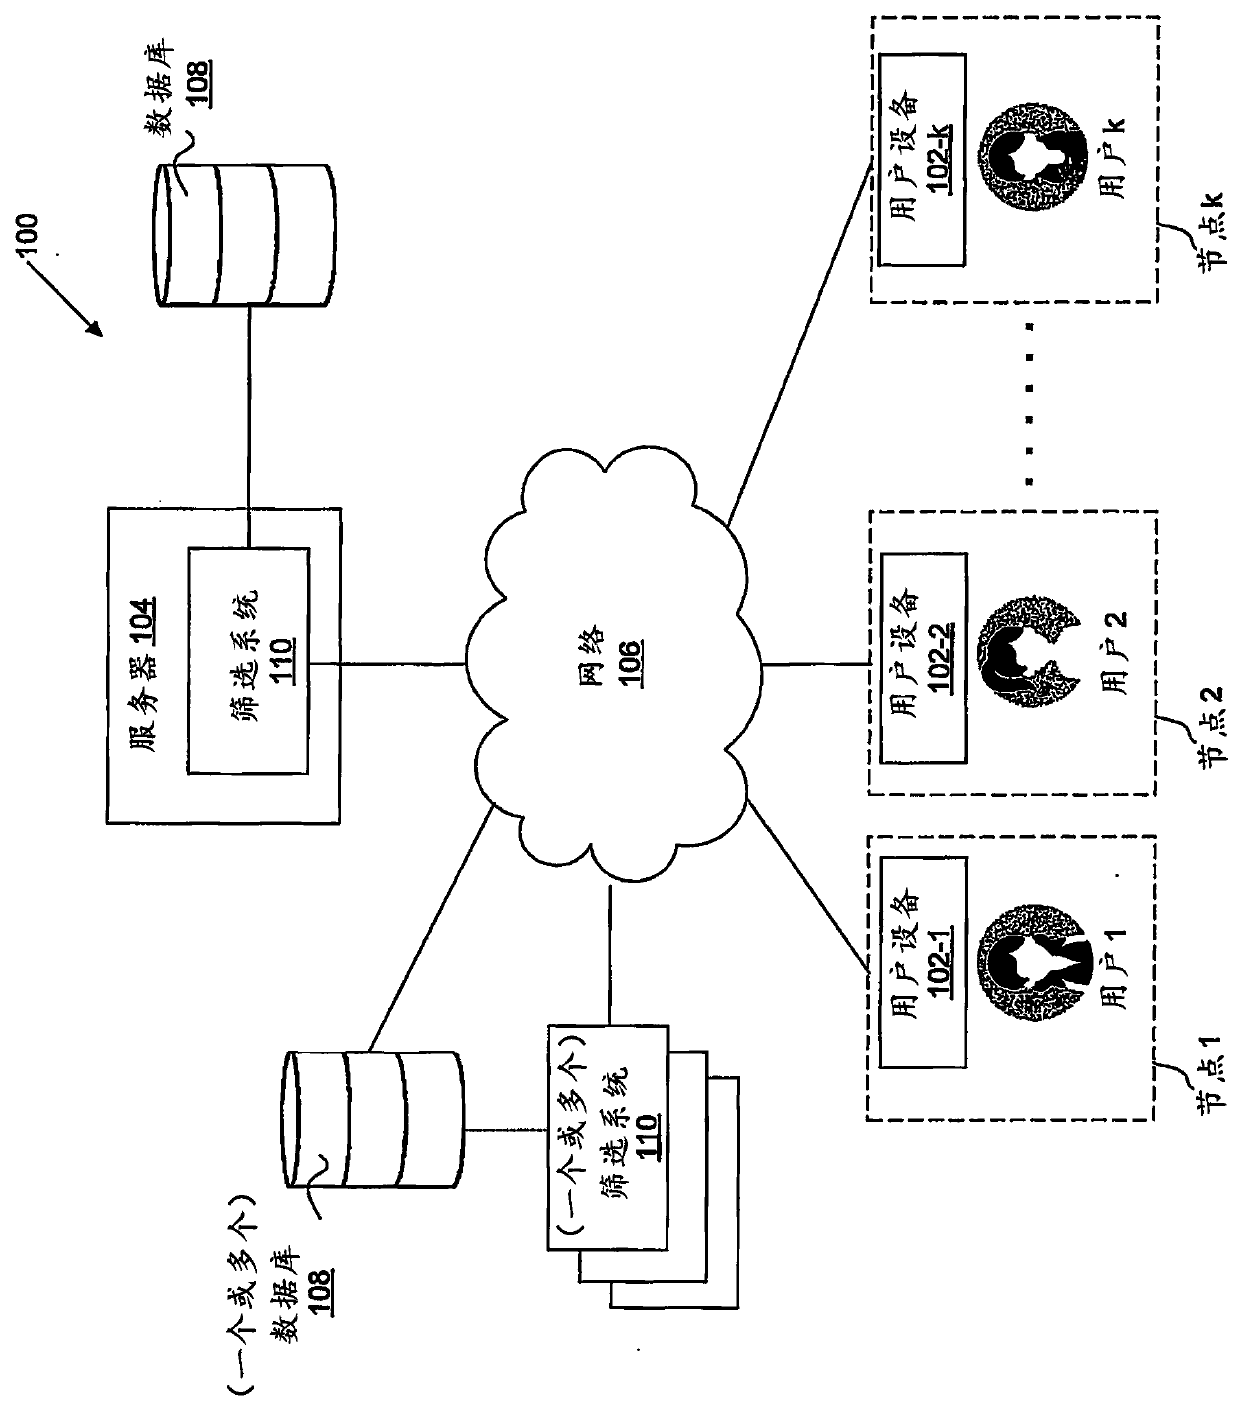 Systems and methods for data-driven identification of talent